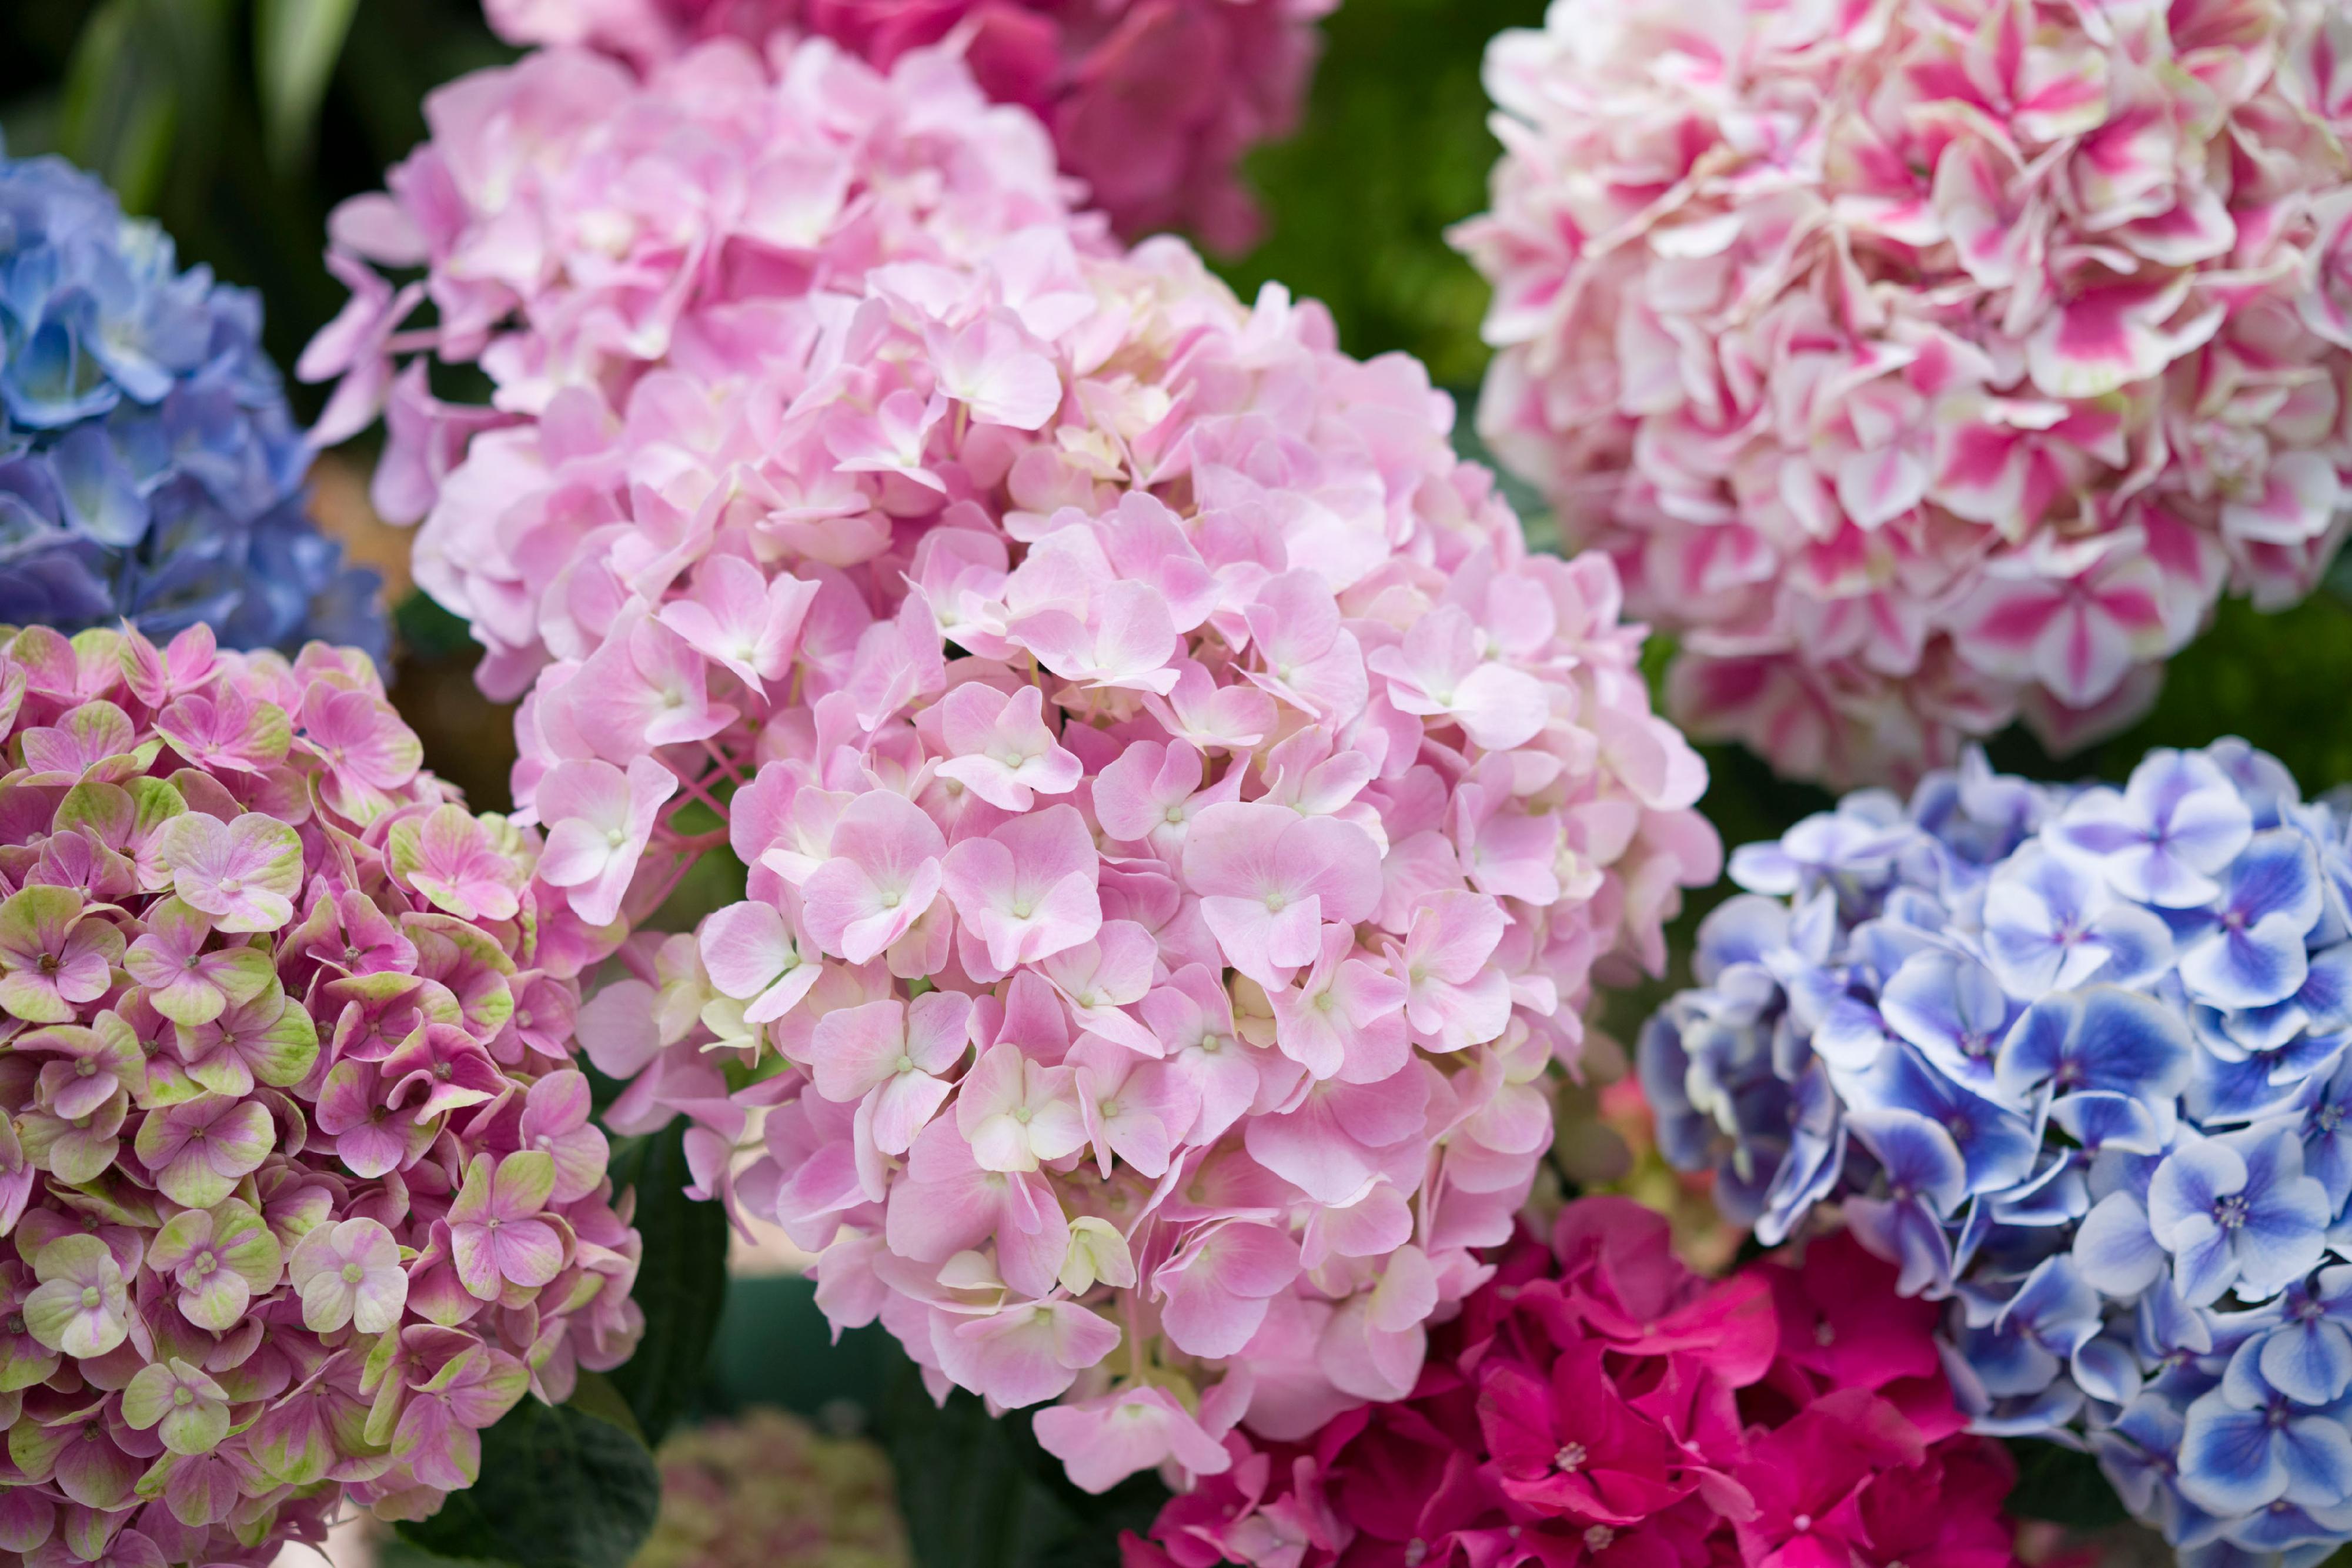 The Hong Kong Flower Show will be held from March 10 to 19 in Victoria Park, with the gorgeous and uniquely grown hydrangea as the theme flower. Native to China and Japan, hydrangeas are a deciduous shrub of the hydrangea family consisting of dozens of species.
